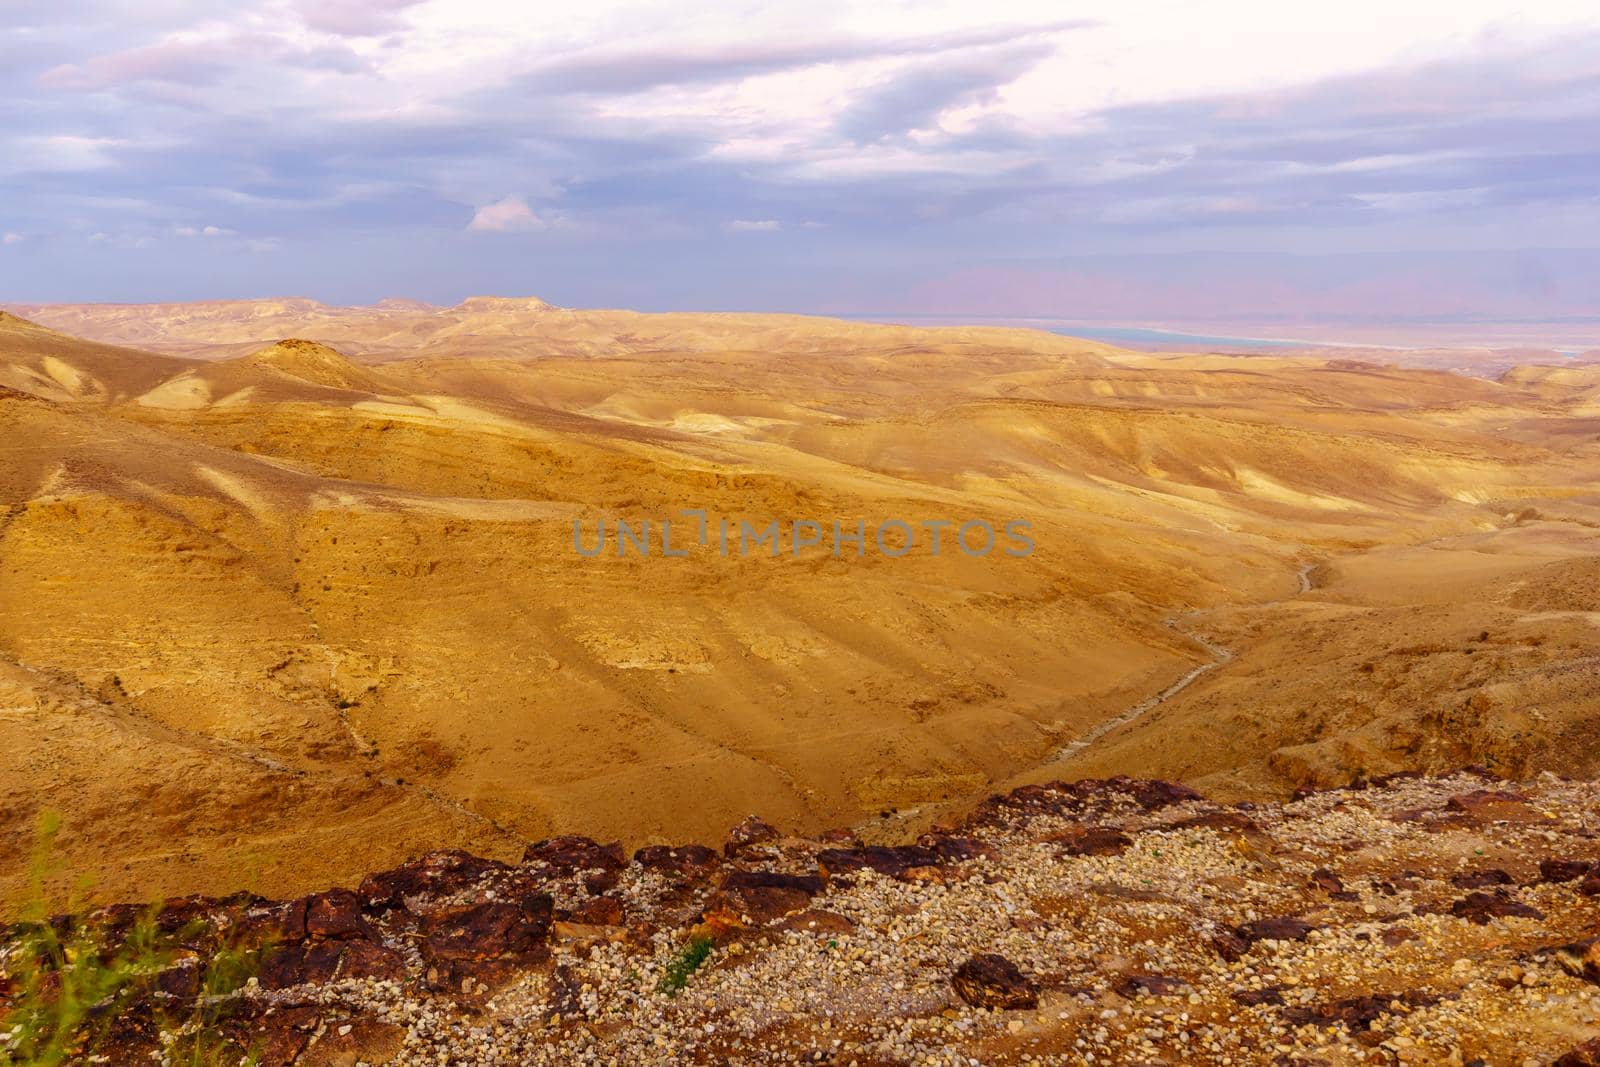 Sunset view of the Judaean Desert and the Dead Sea, from Moab viewpoint, Southern Israel